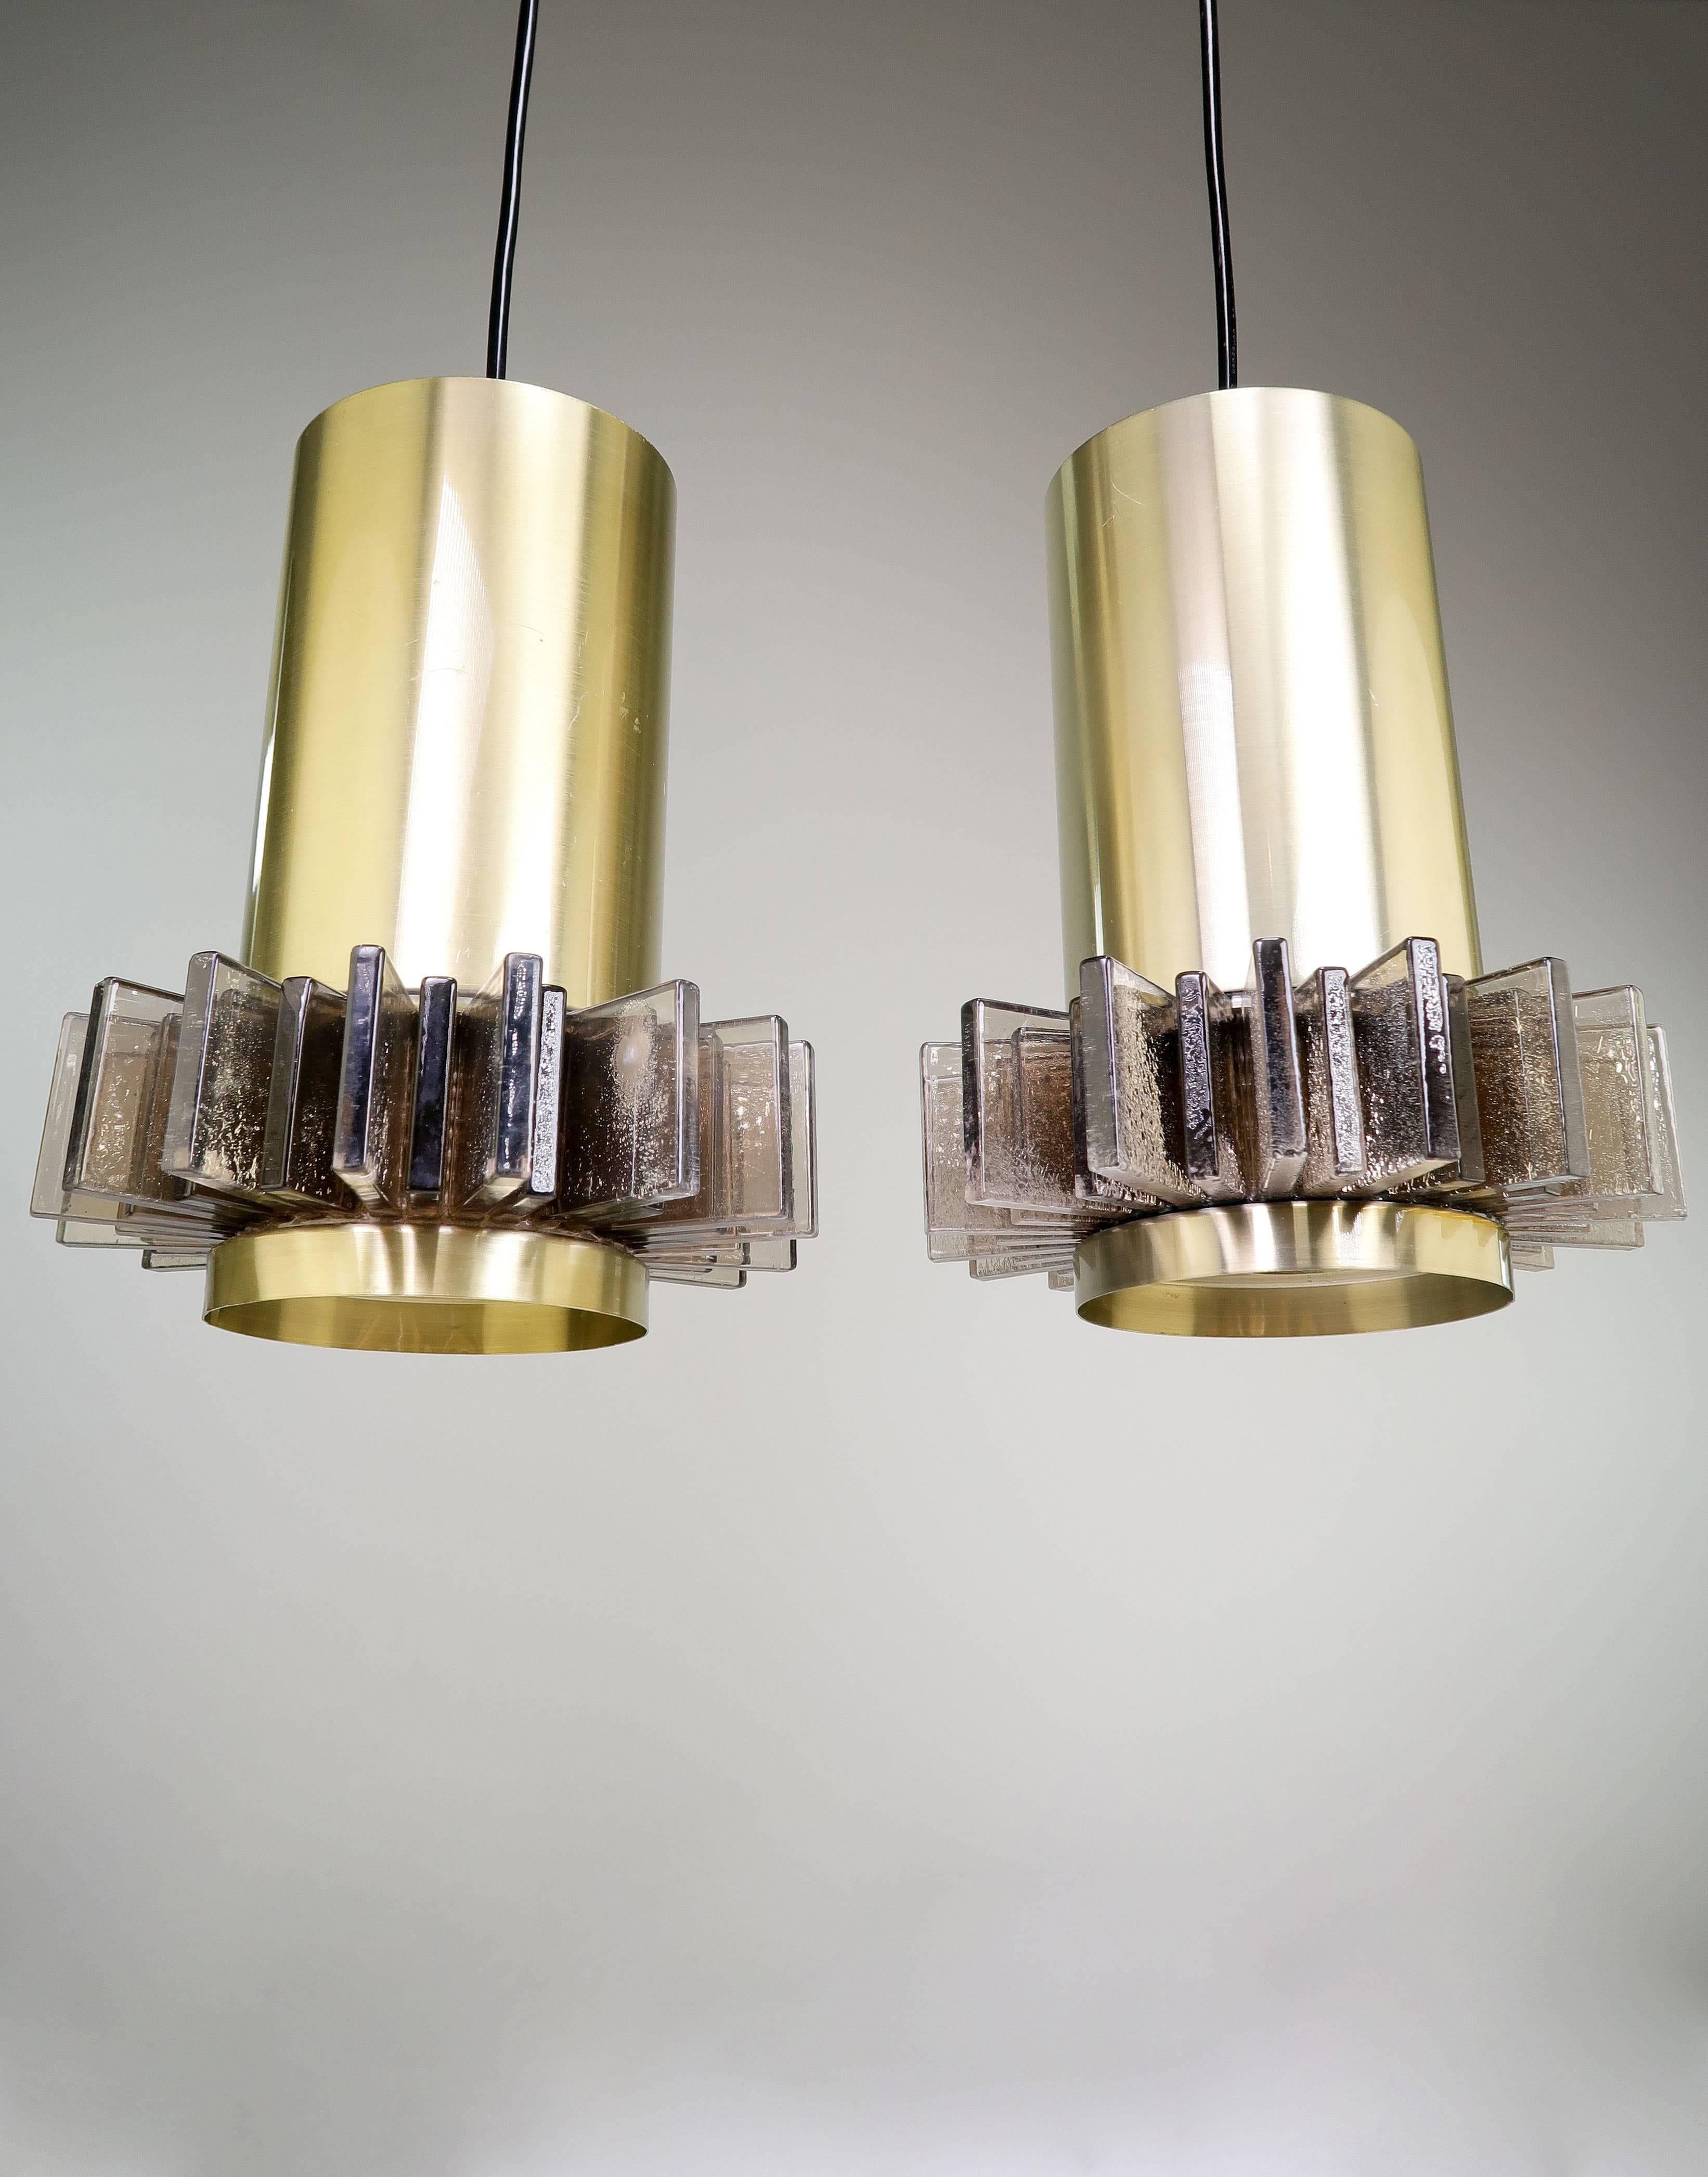 Pair of Danish Mid Century Modern Space Age pendants by designer Claus Bolby for CeBo Industri in the mid 1970s. Brass body with brownish black textured acrylic slates. Bolby had a signature technique that involved adding bubbles to the acrylic for